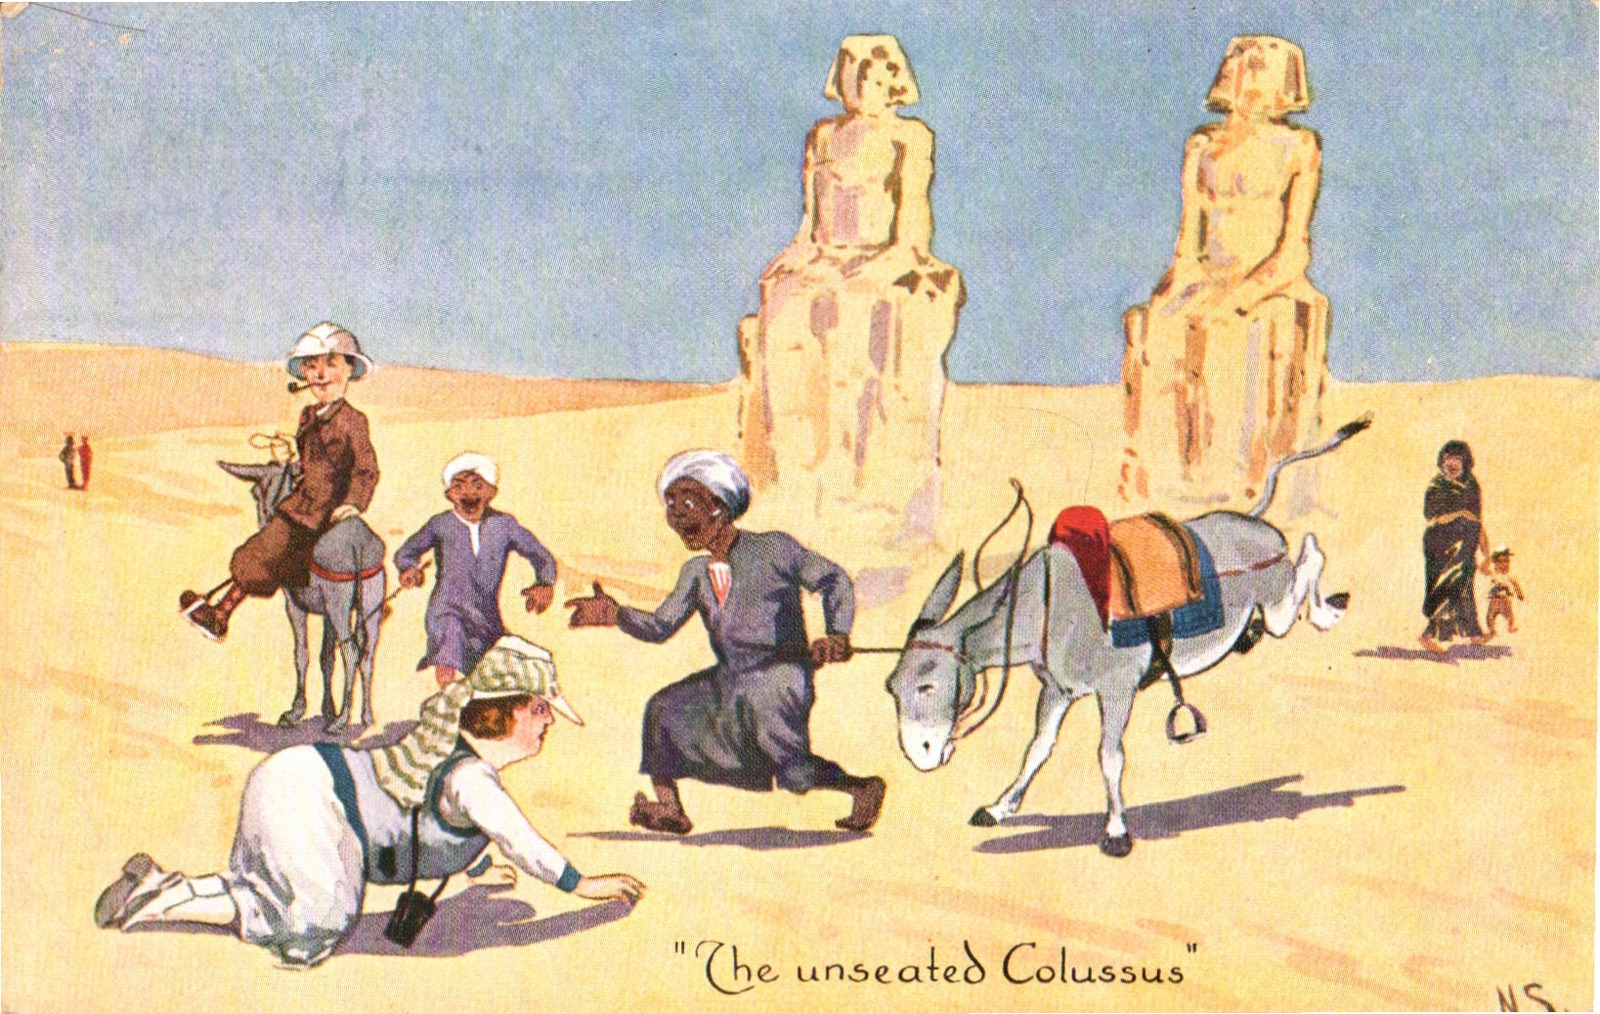 Comic Humorous Divided Back Woman Falling off of Camel Posted 1926